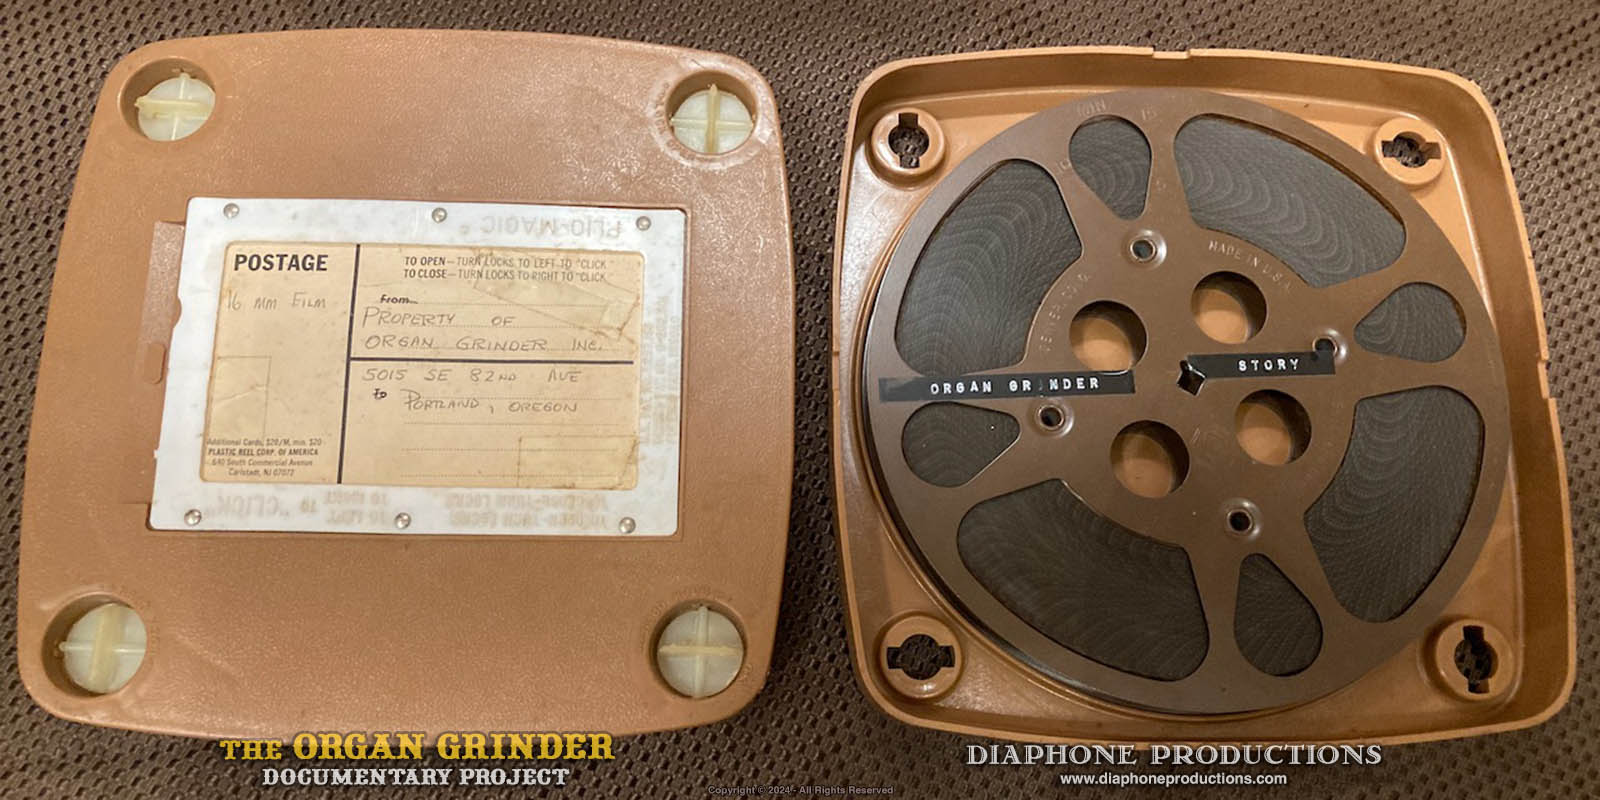 A vintage 16mm film reel, displayed in its shipping container. An old-style Dymo label on the film reel reads "The Organ Grinder Story".